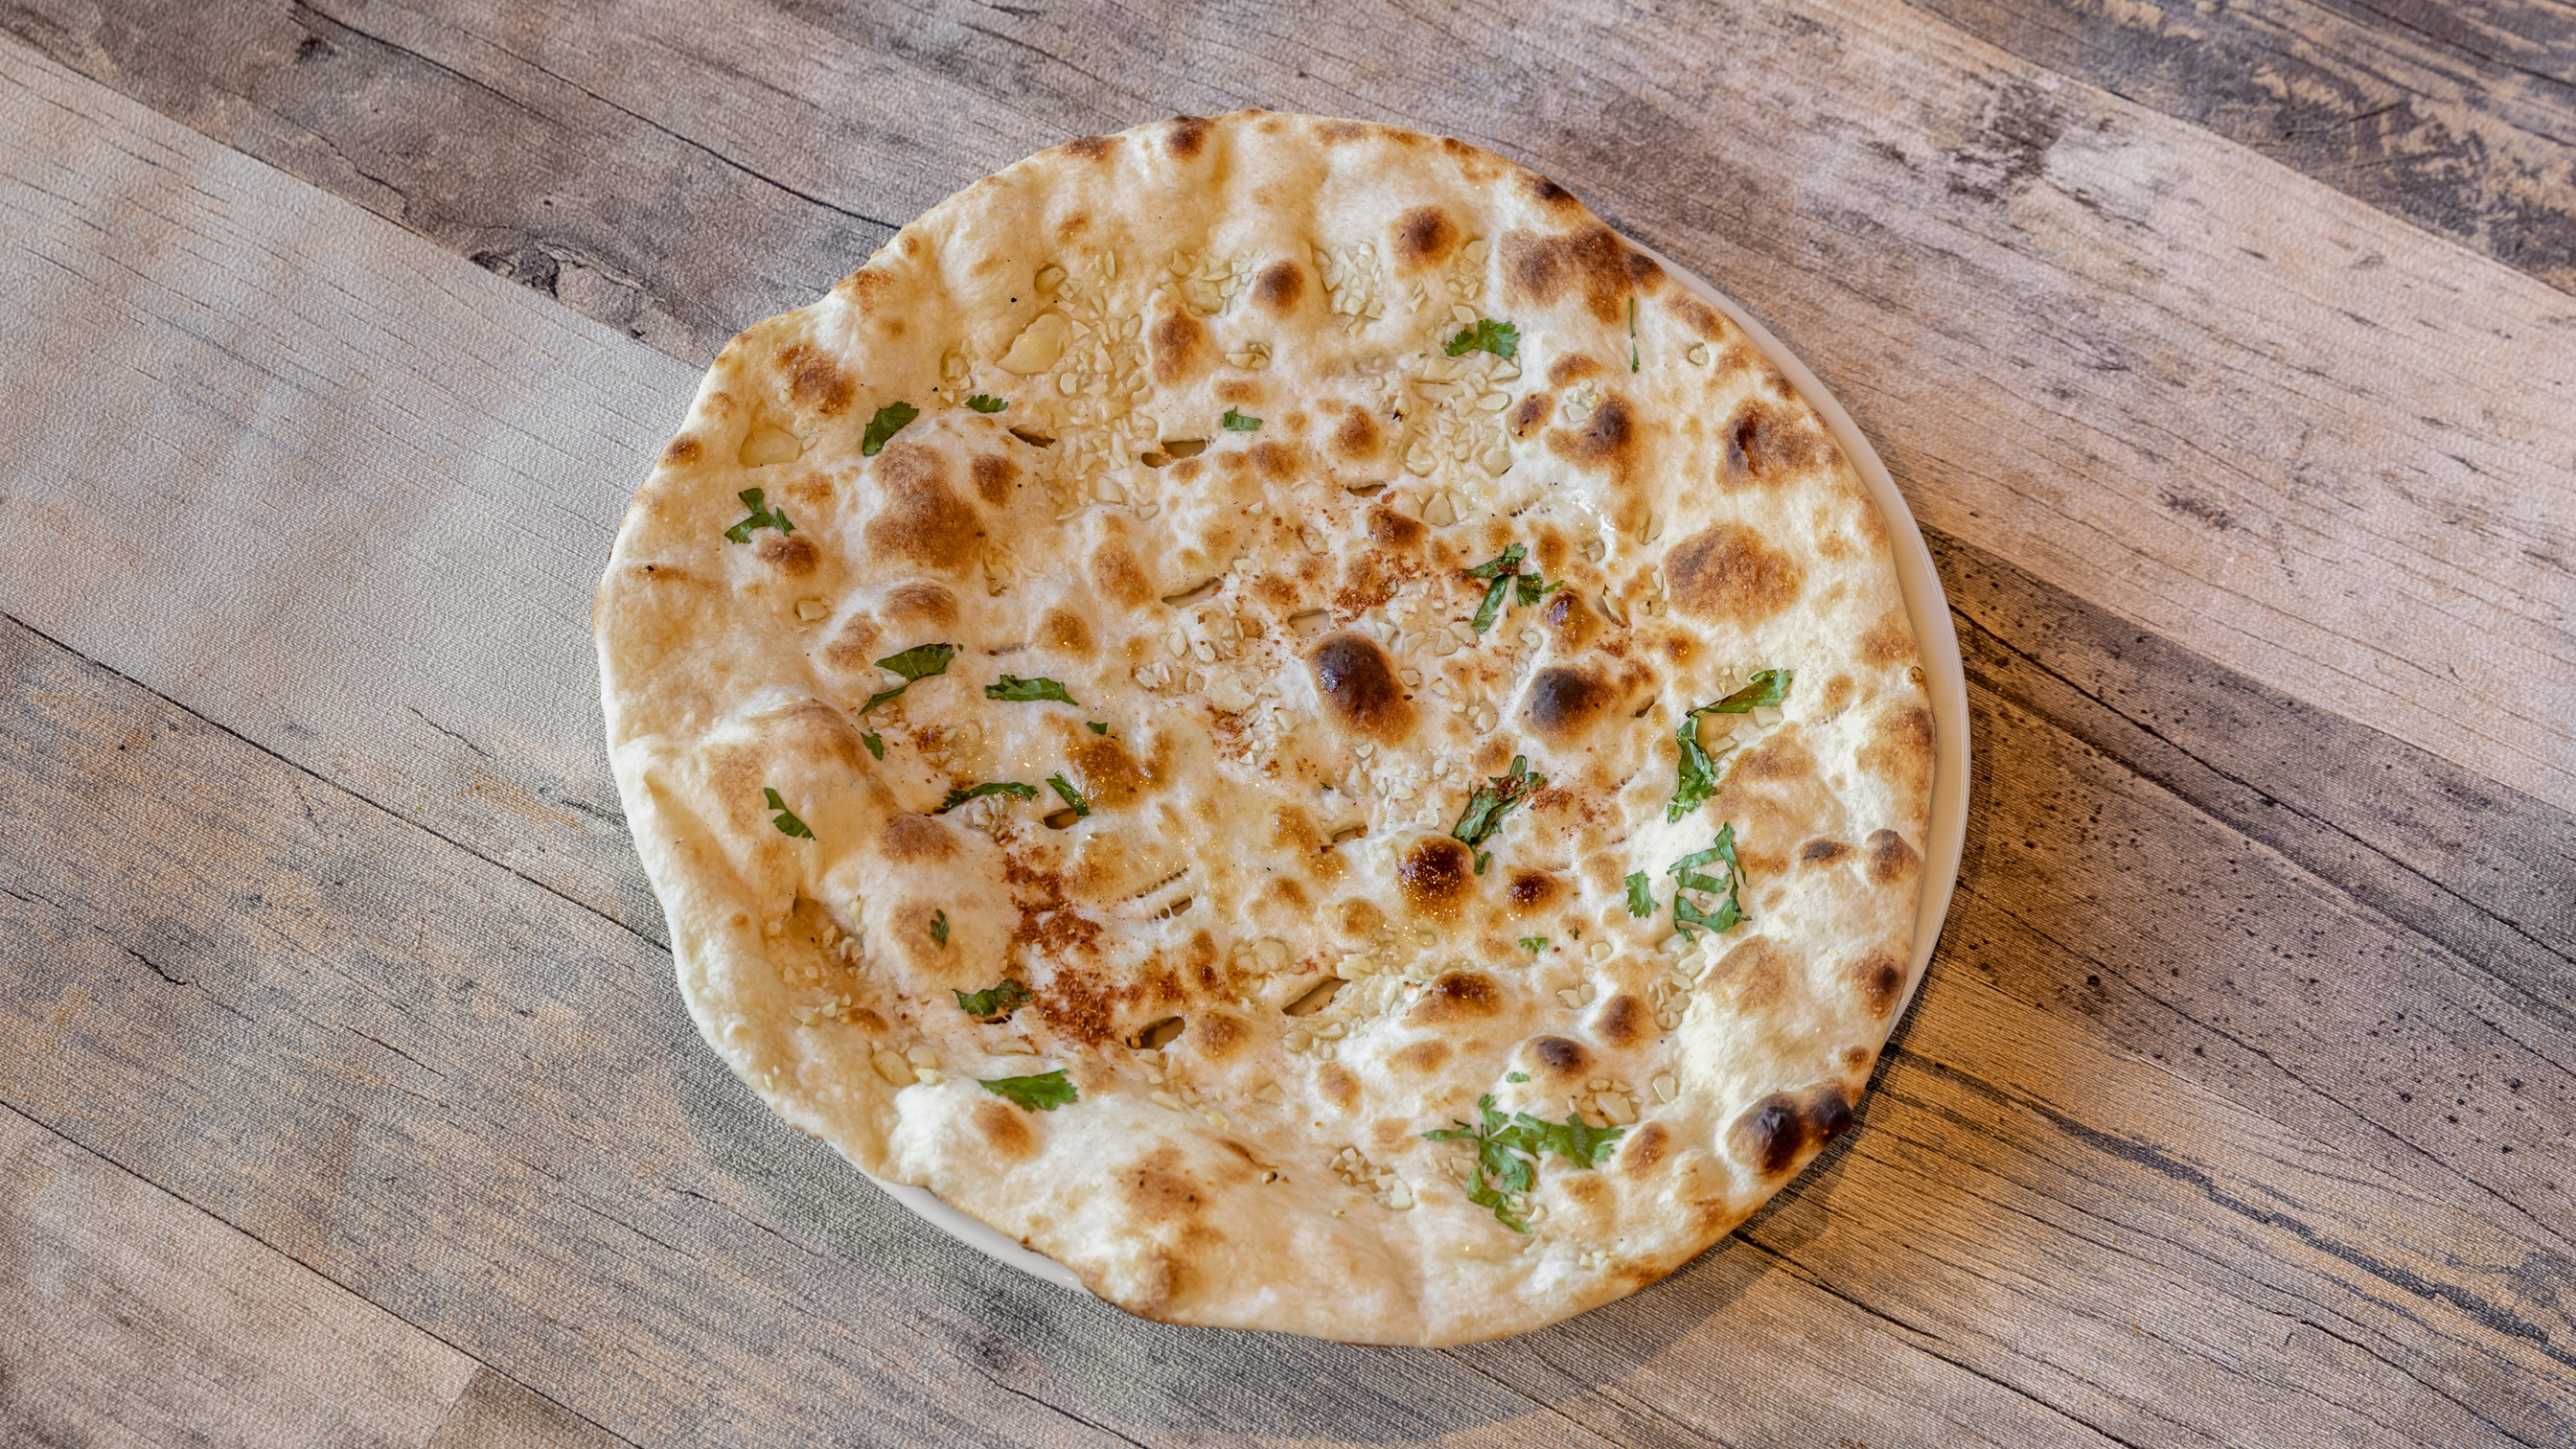 Garlic Naan by Maison Indian Food